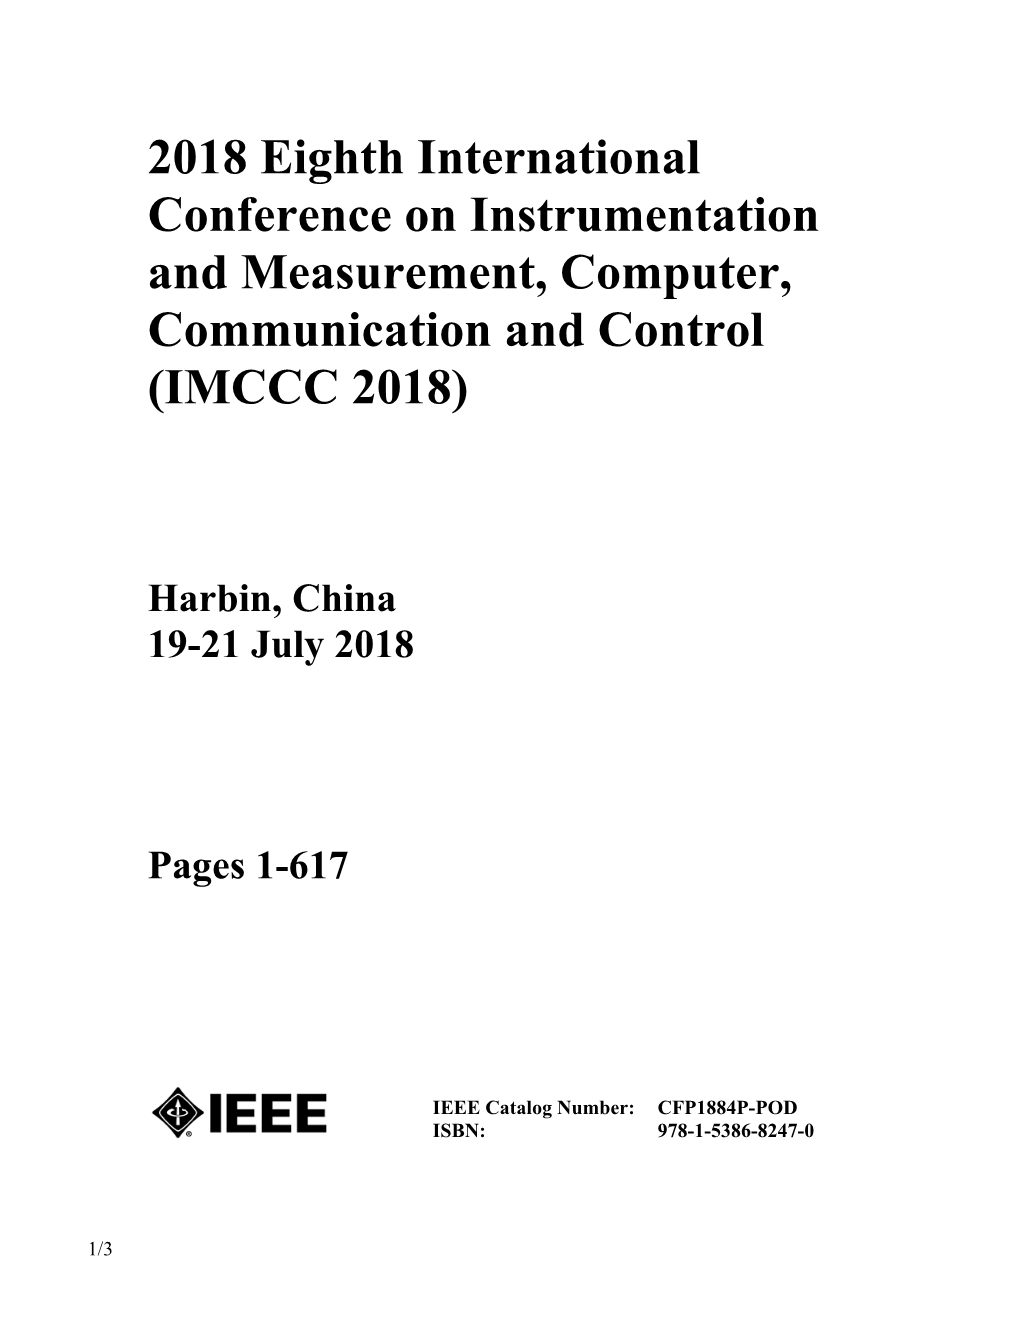 2018 Eighth International Conference on Instrumentation and Measurement, Computer, Communication and Control (IMCCC 2018)